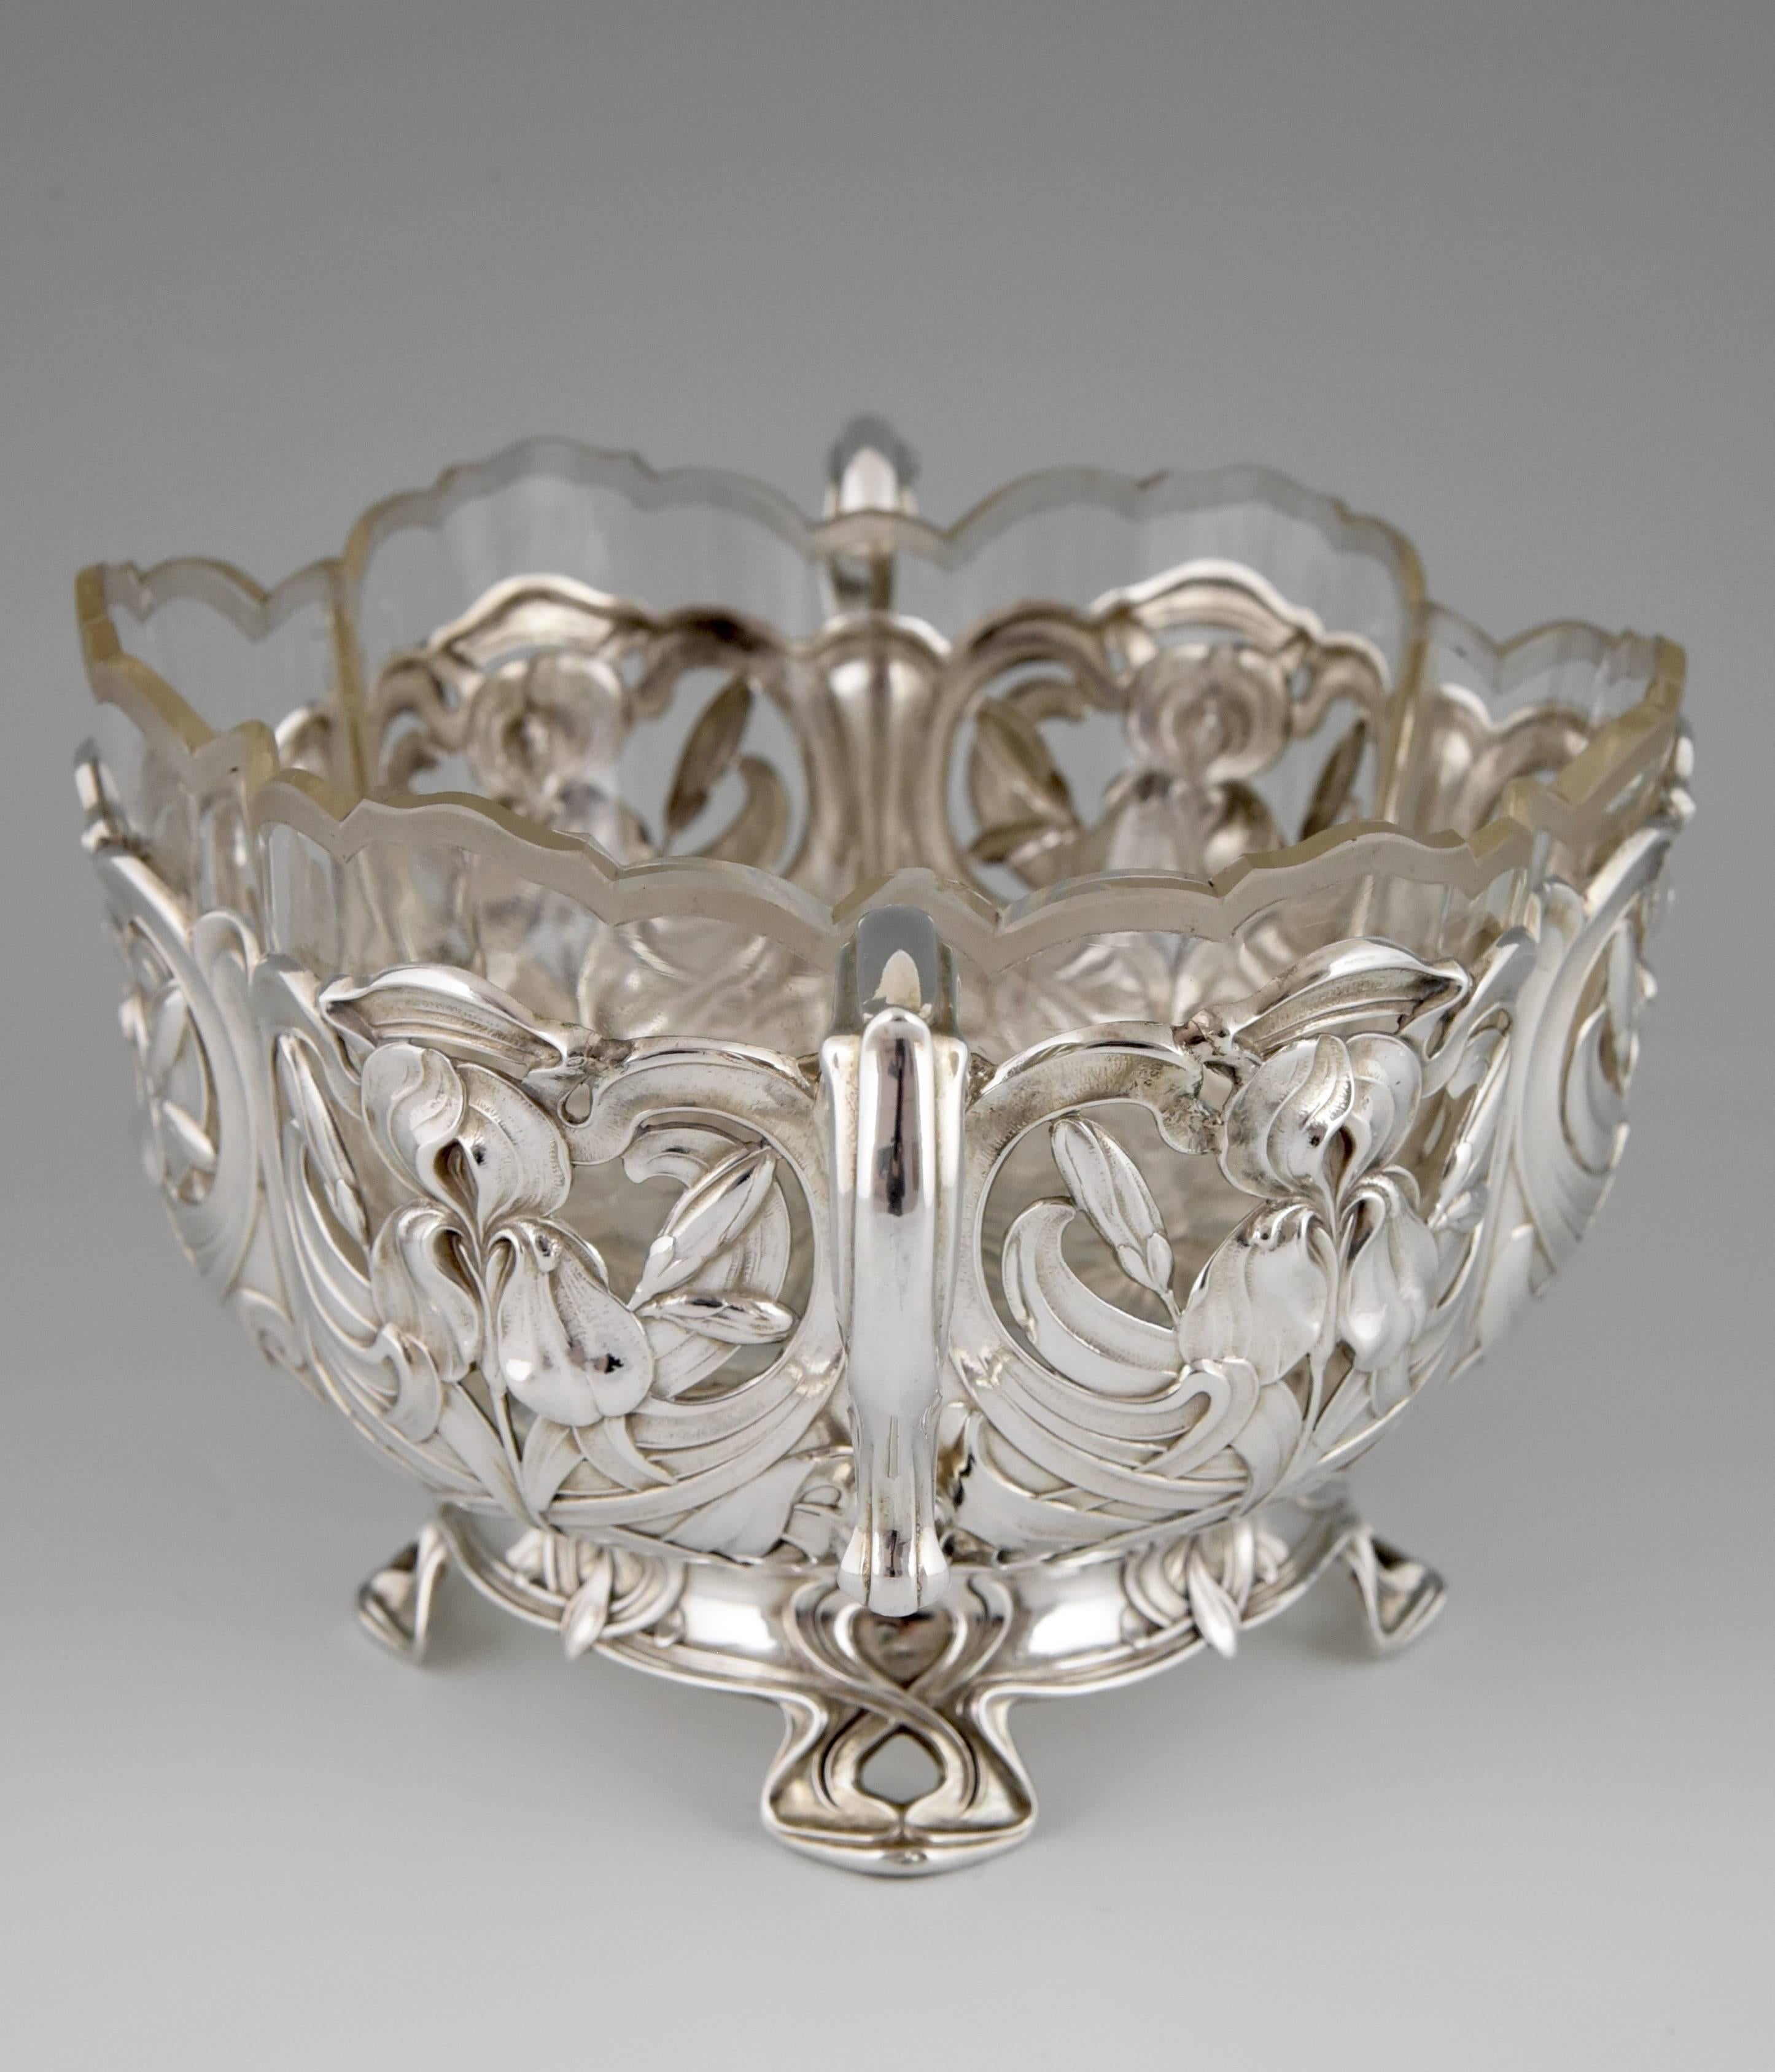 German Art Nouveau silver flower dish with glass liner by A. Strobl, 1900. 4